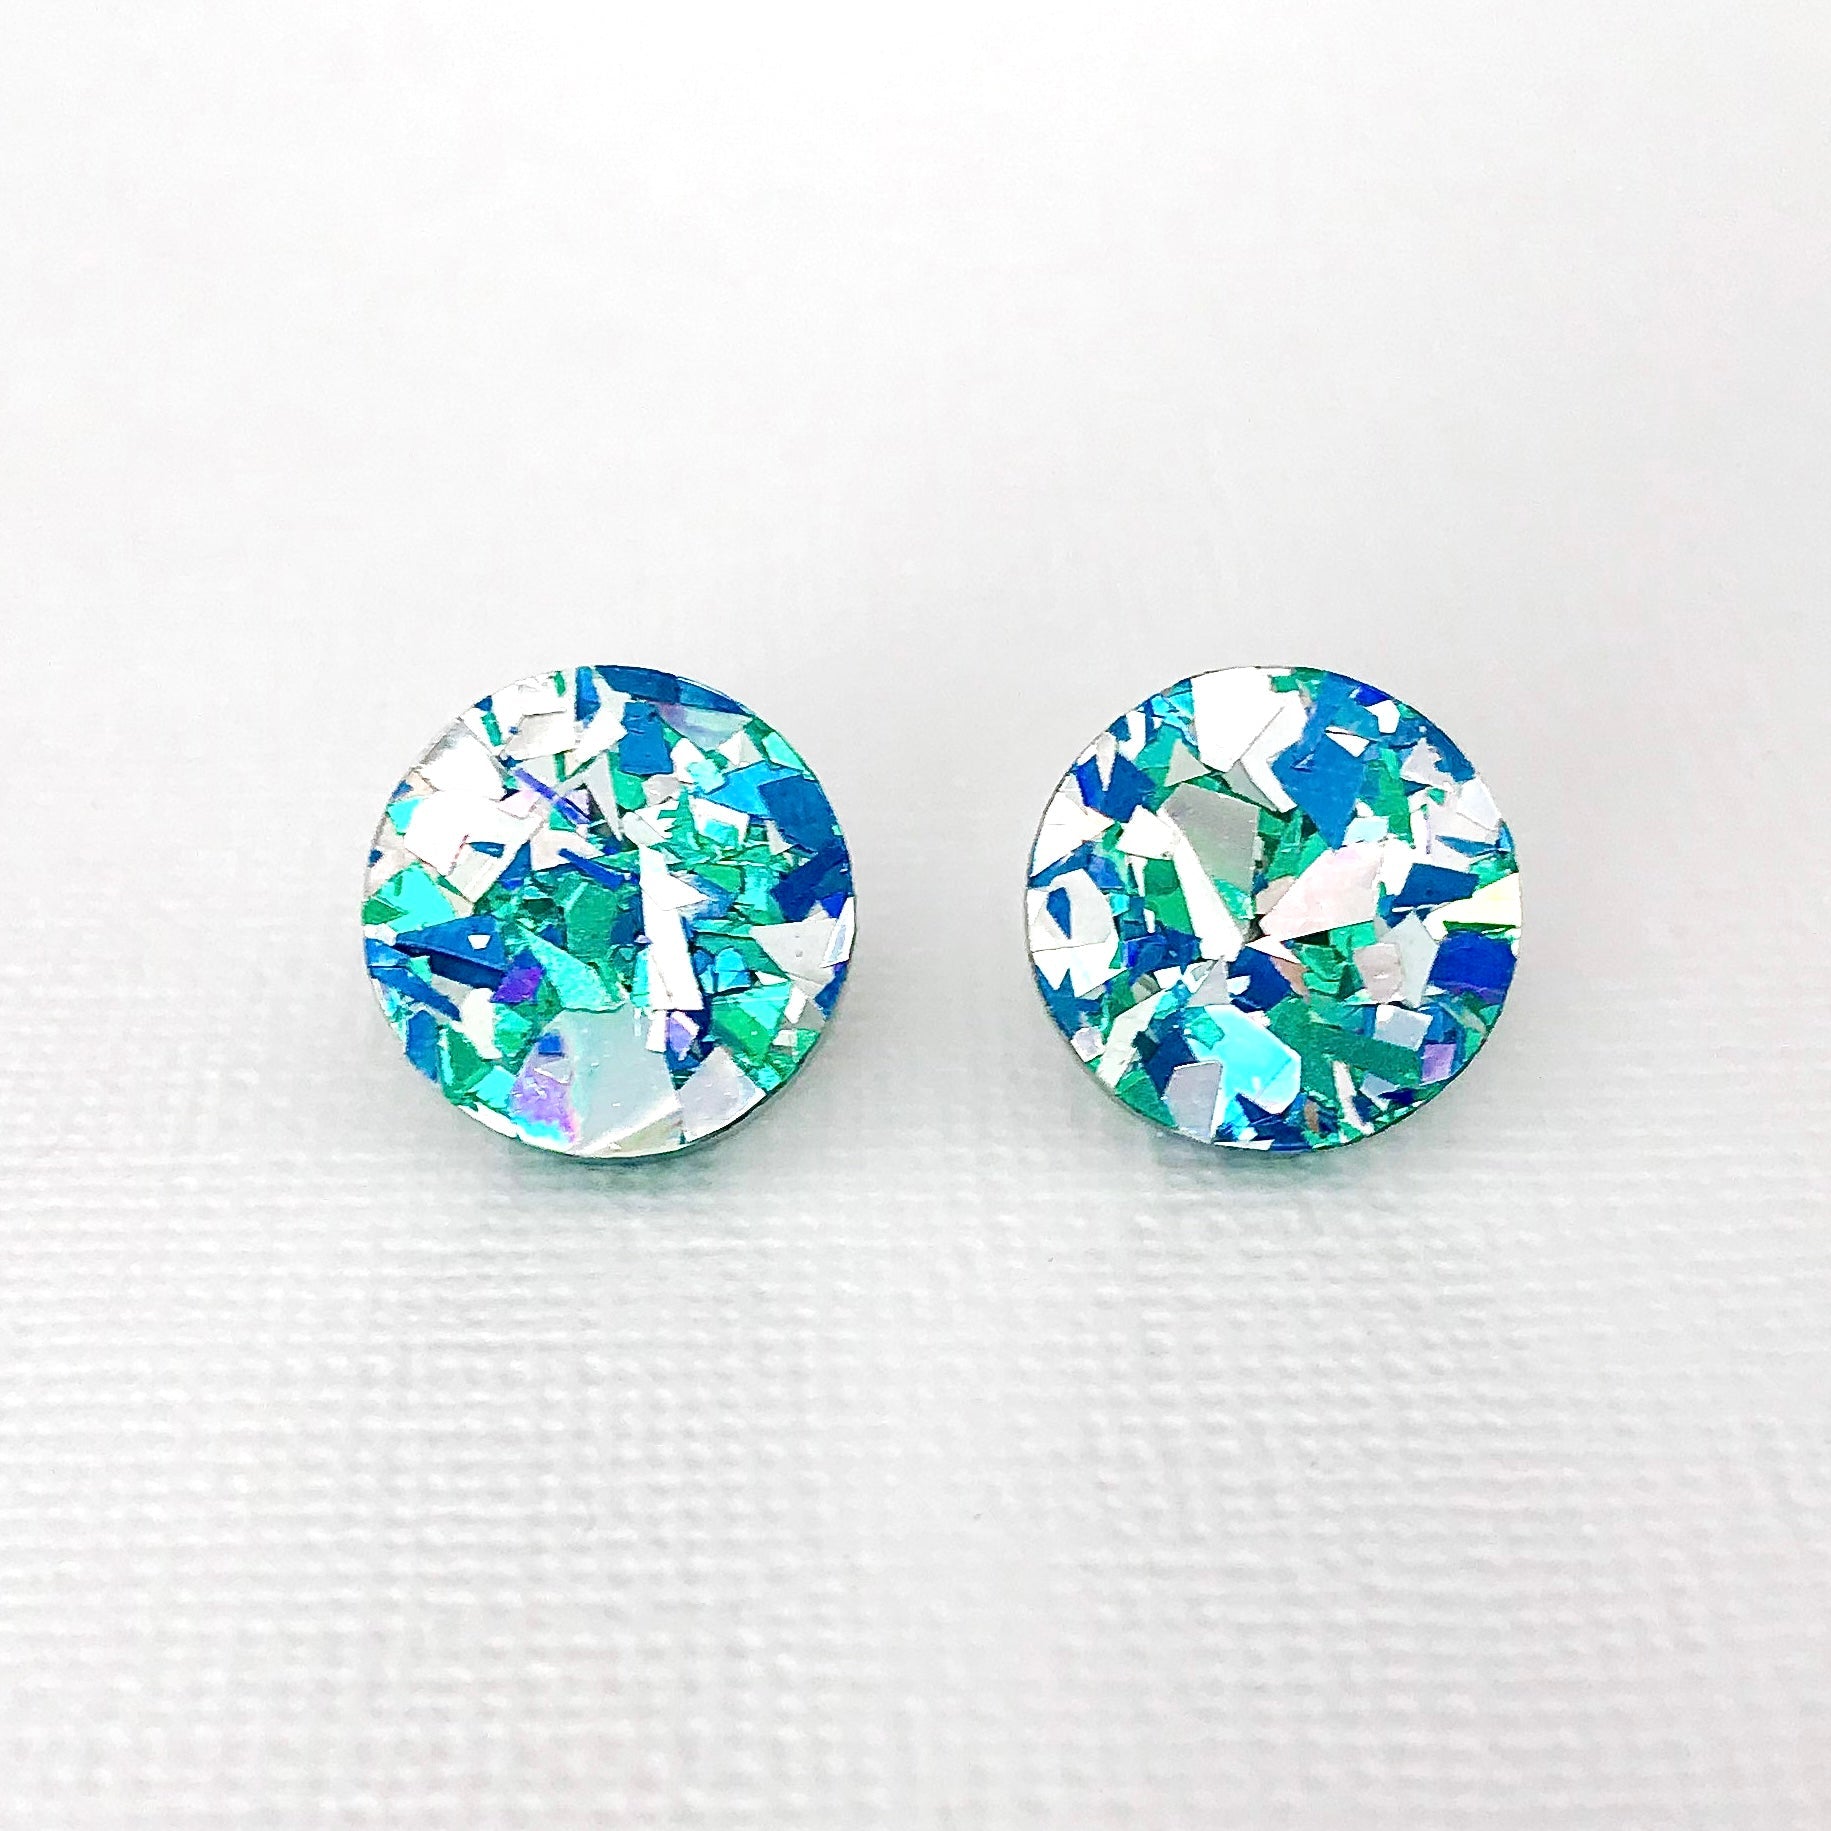 Small Round Acrylic Studs (15mm) - Ice Blue Shard Glitter - Lacey Lou Sparkles